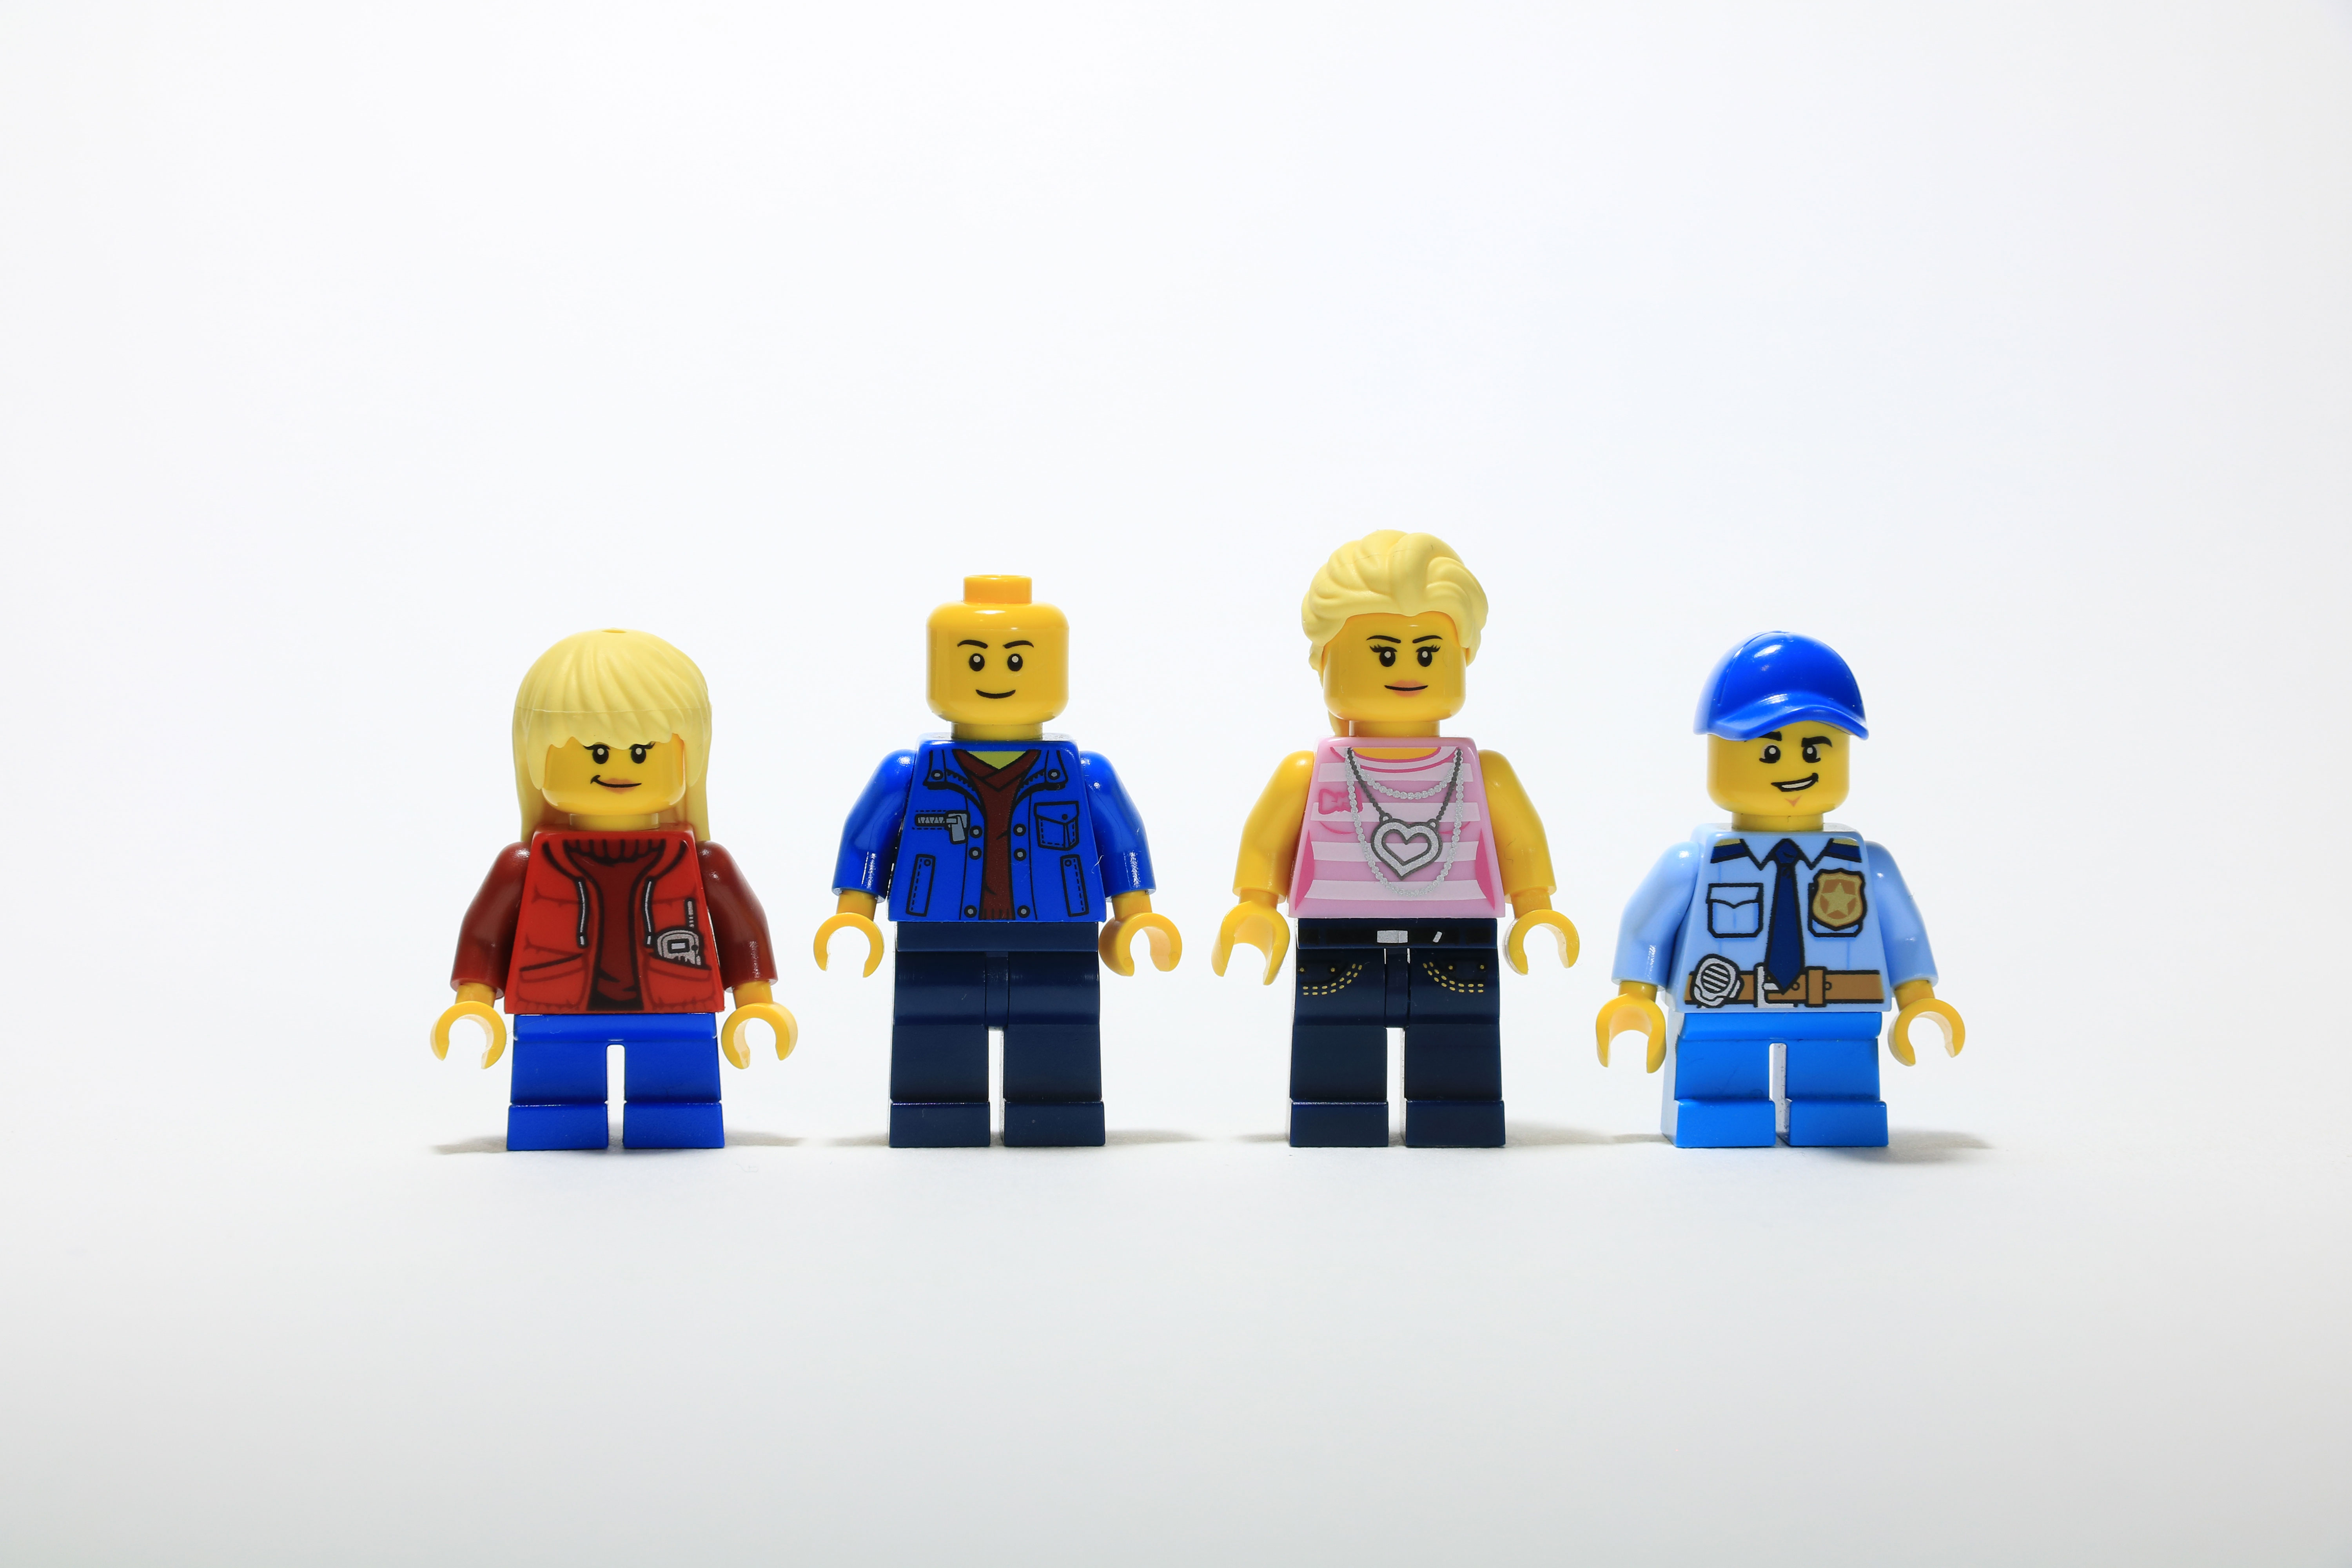 Family Portrait with LEGO minifigs.